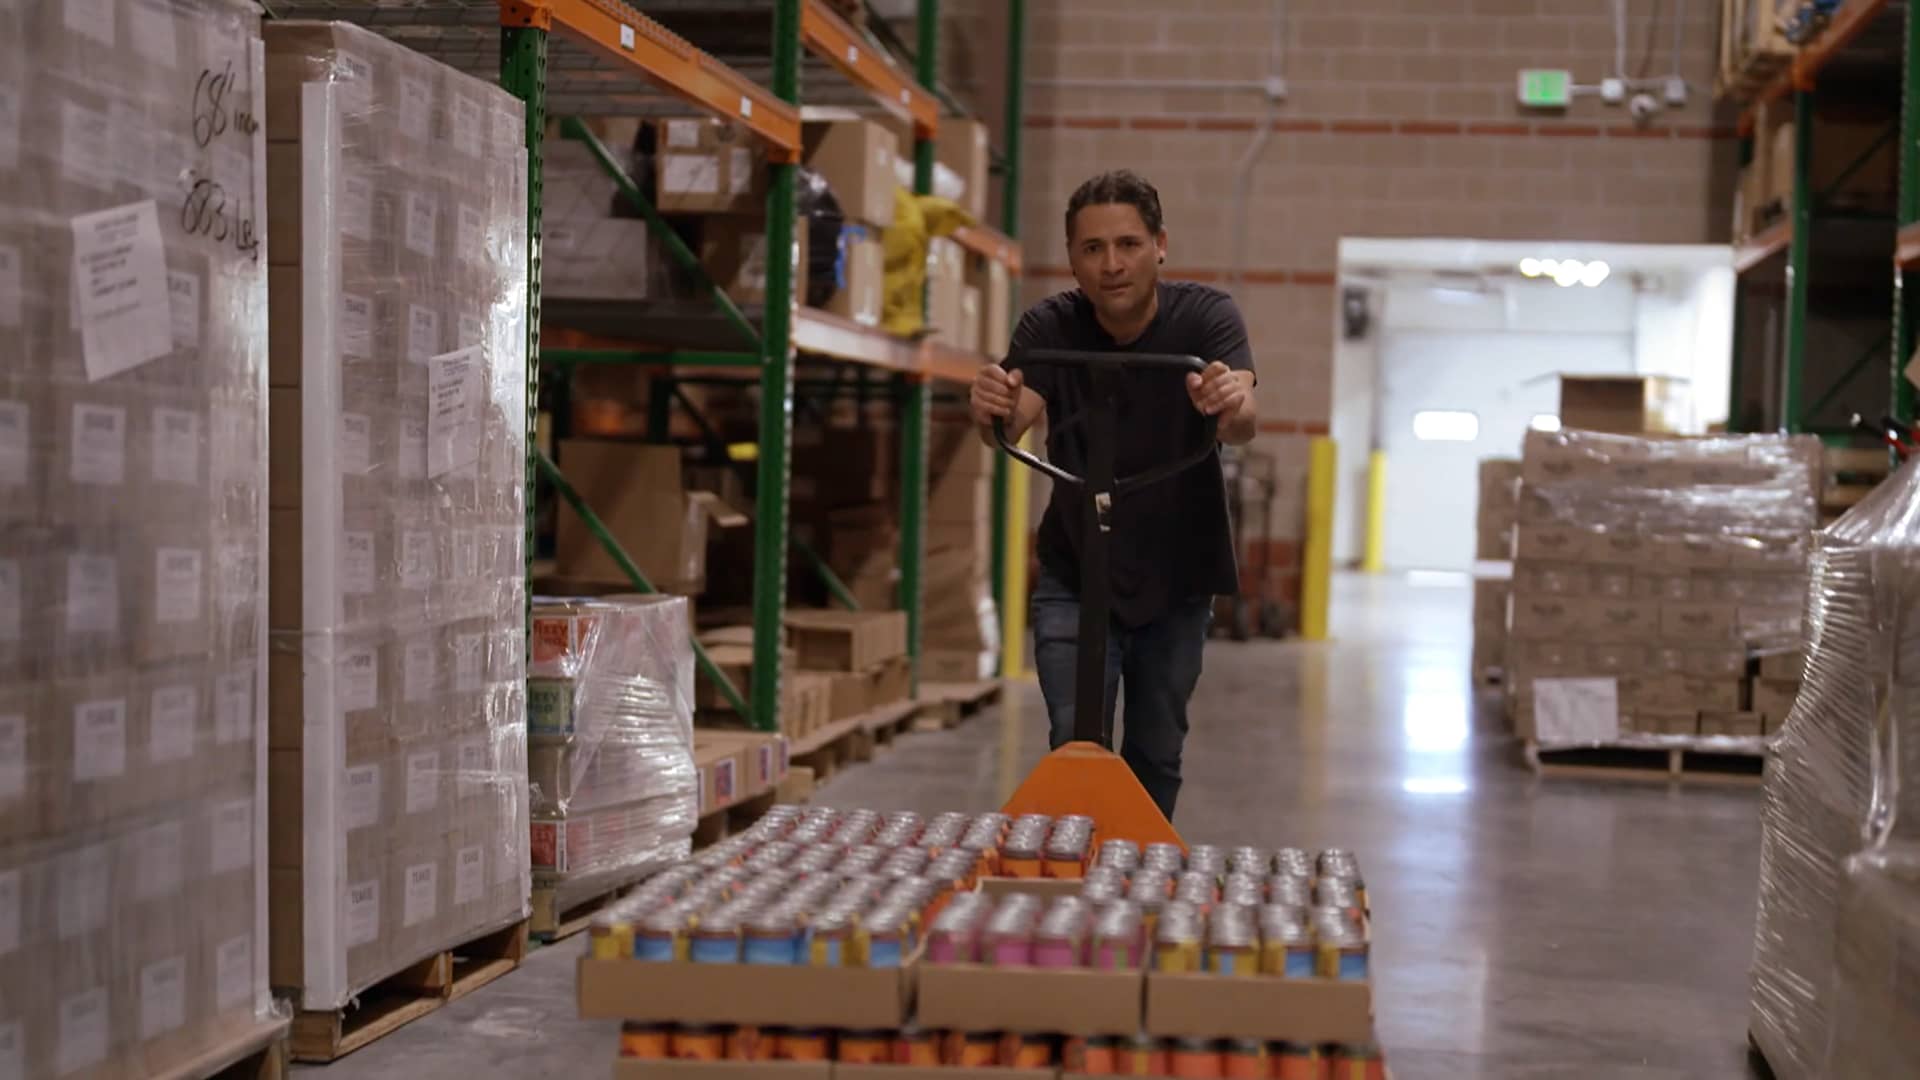 Frescos Naturales founder Juan Stewart maneuvers a cart laden with cases of his sparkling fruit drinks inside a warehouse.